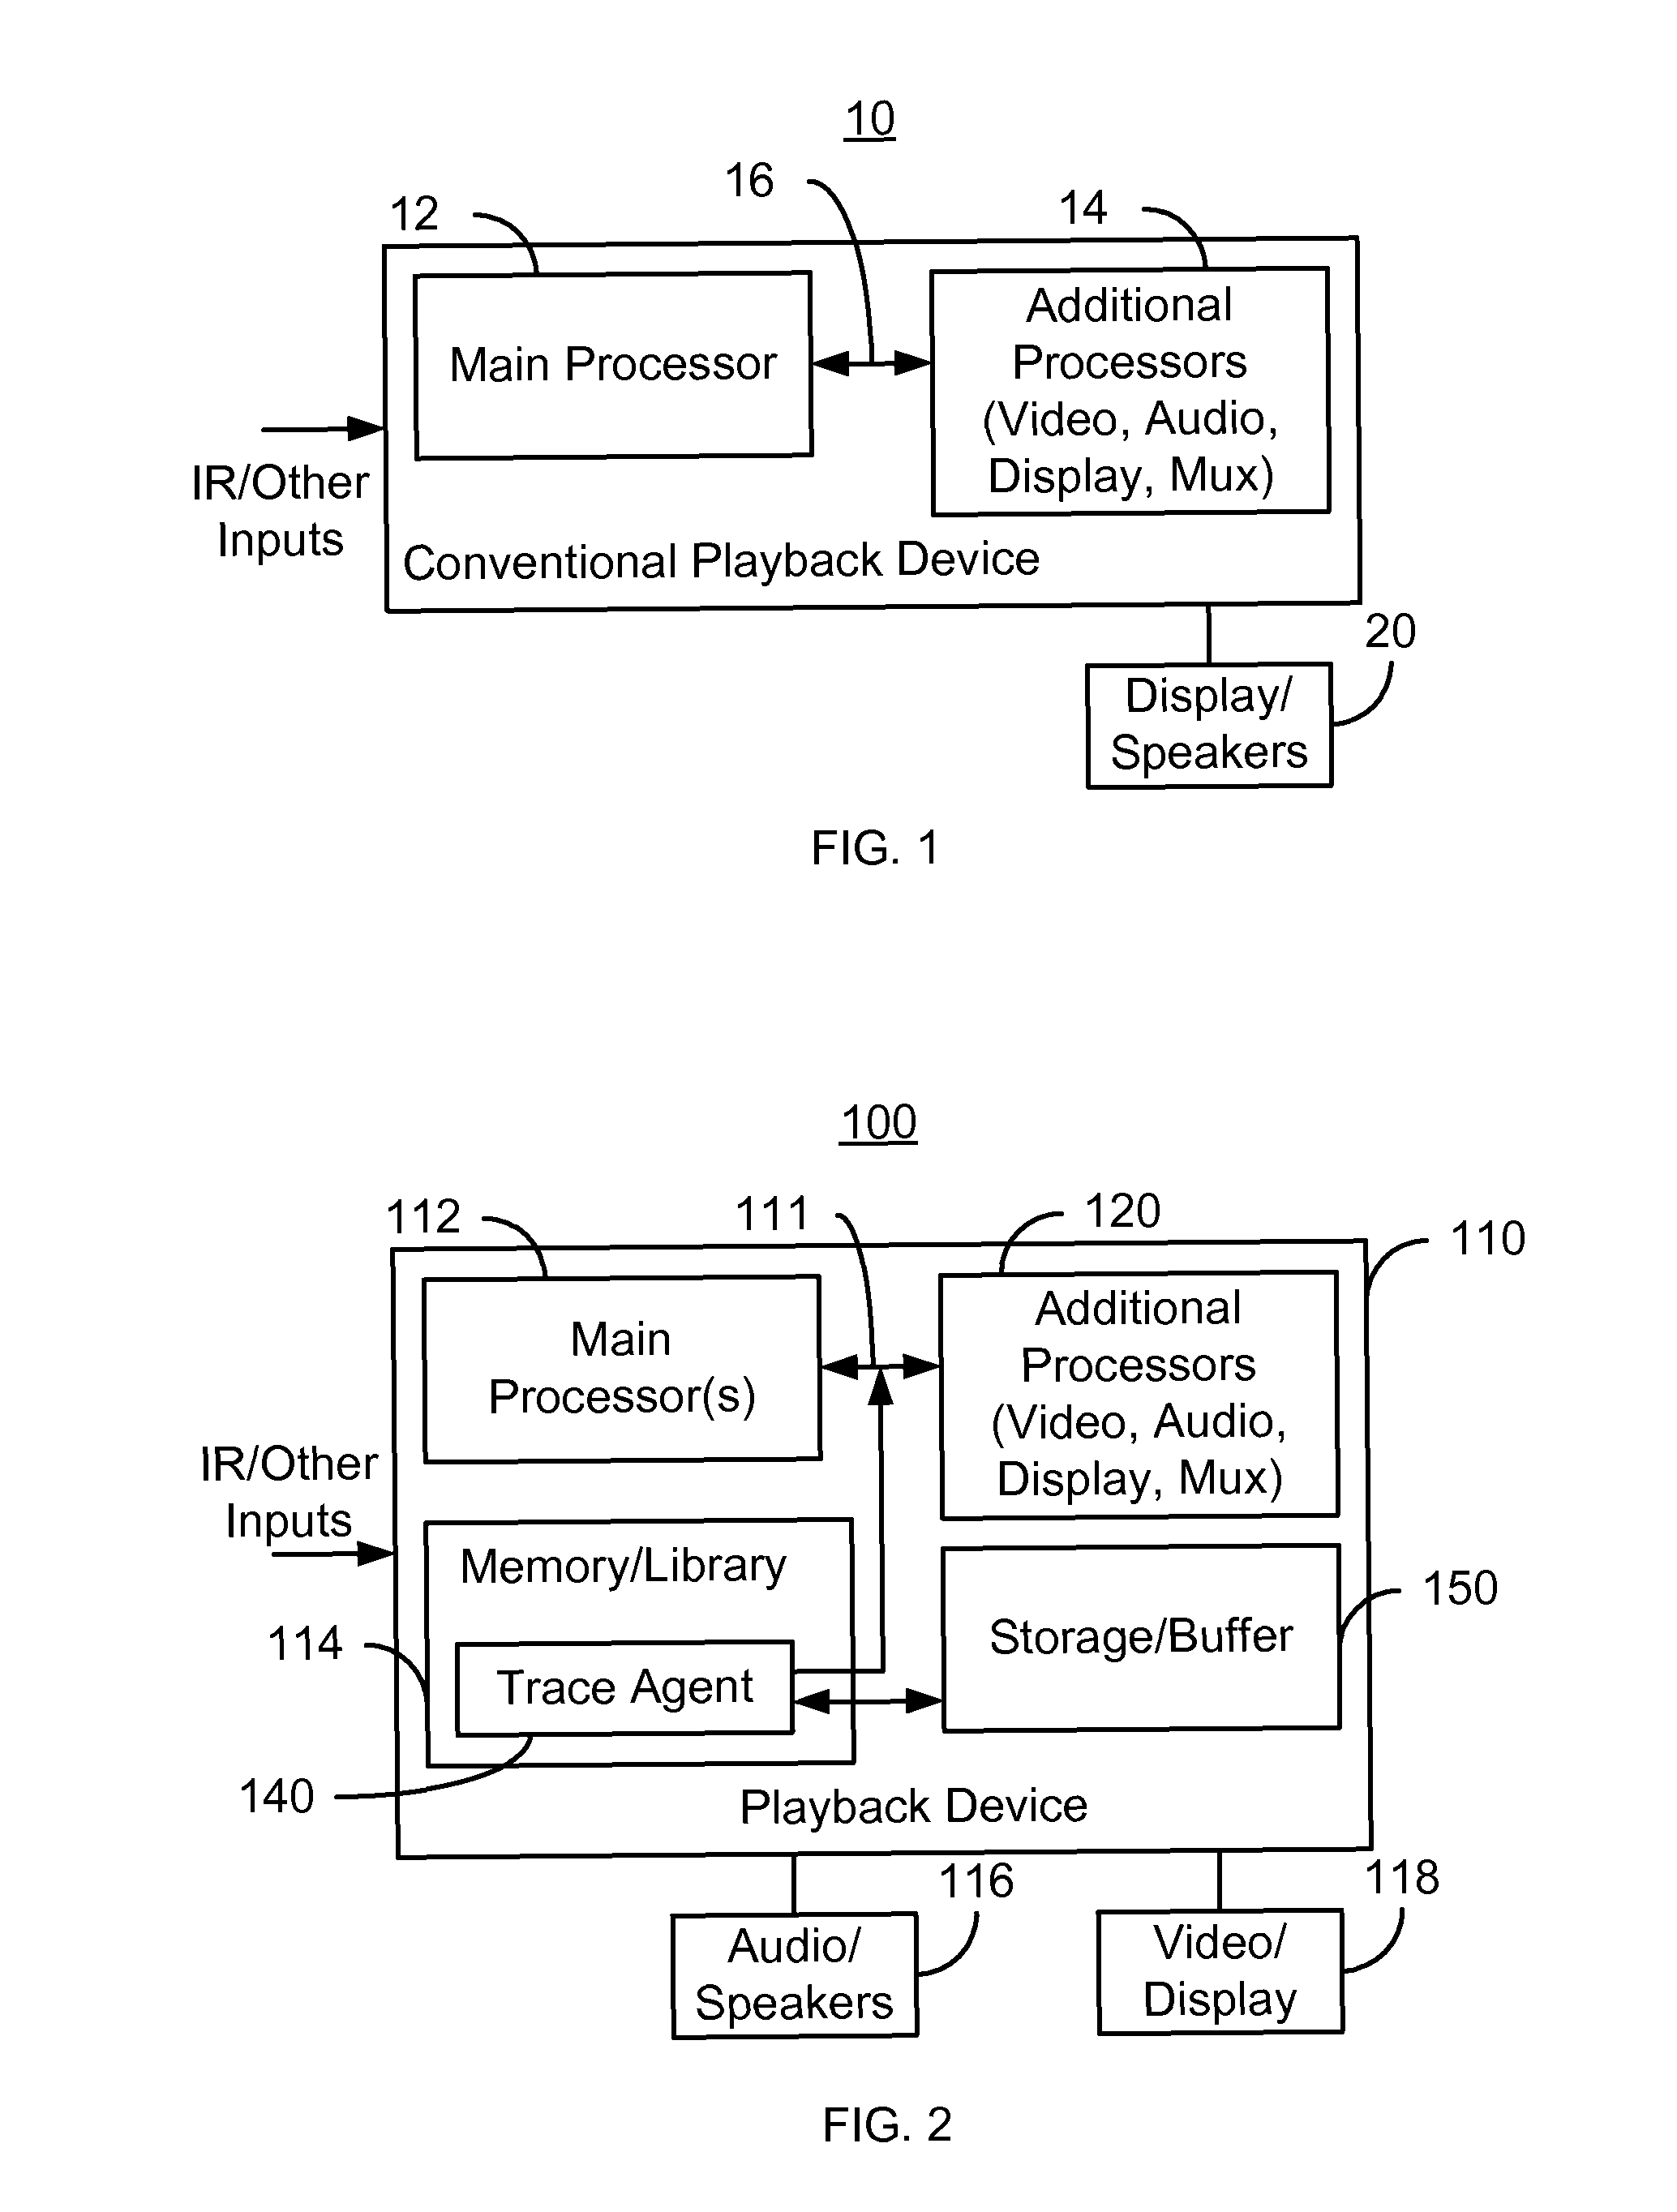 Methods and systems for monitoring quality of a video/audio playback device